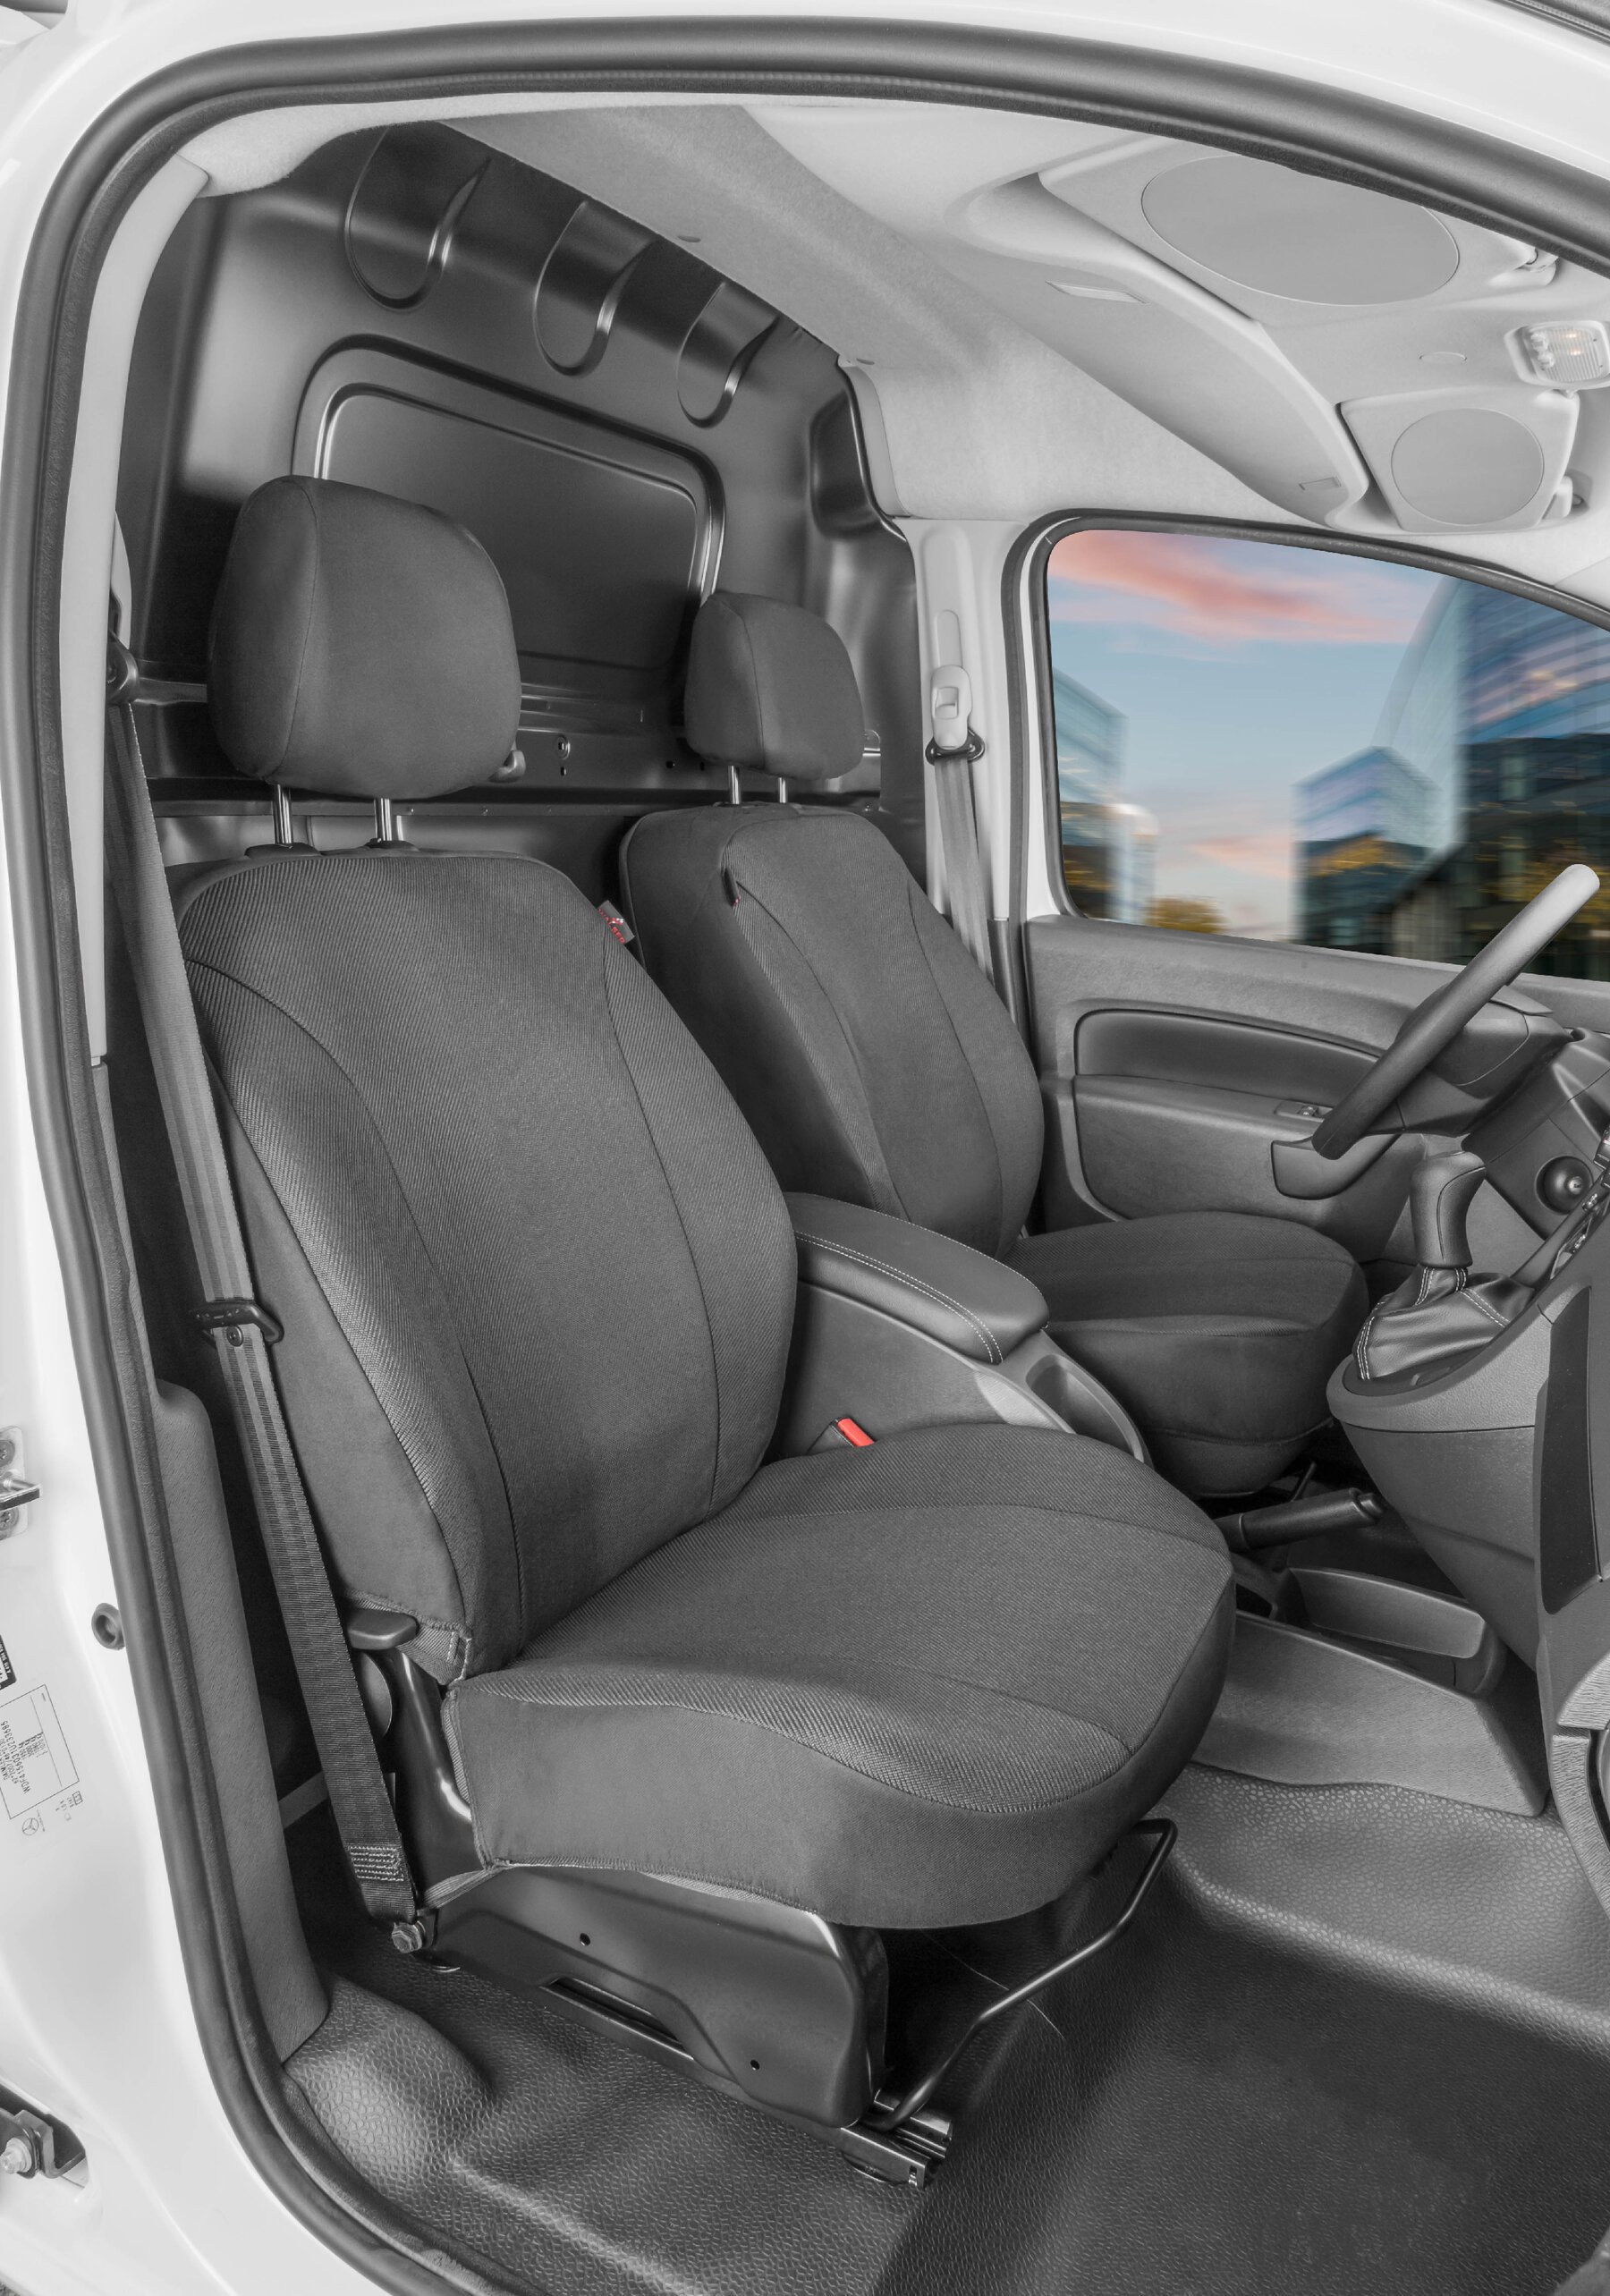 Car Seat cover Transporter made of fabric for Mercedes-Benz Citan W415, 2 single seats front